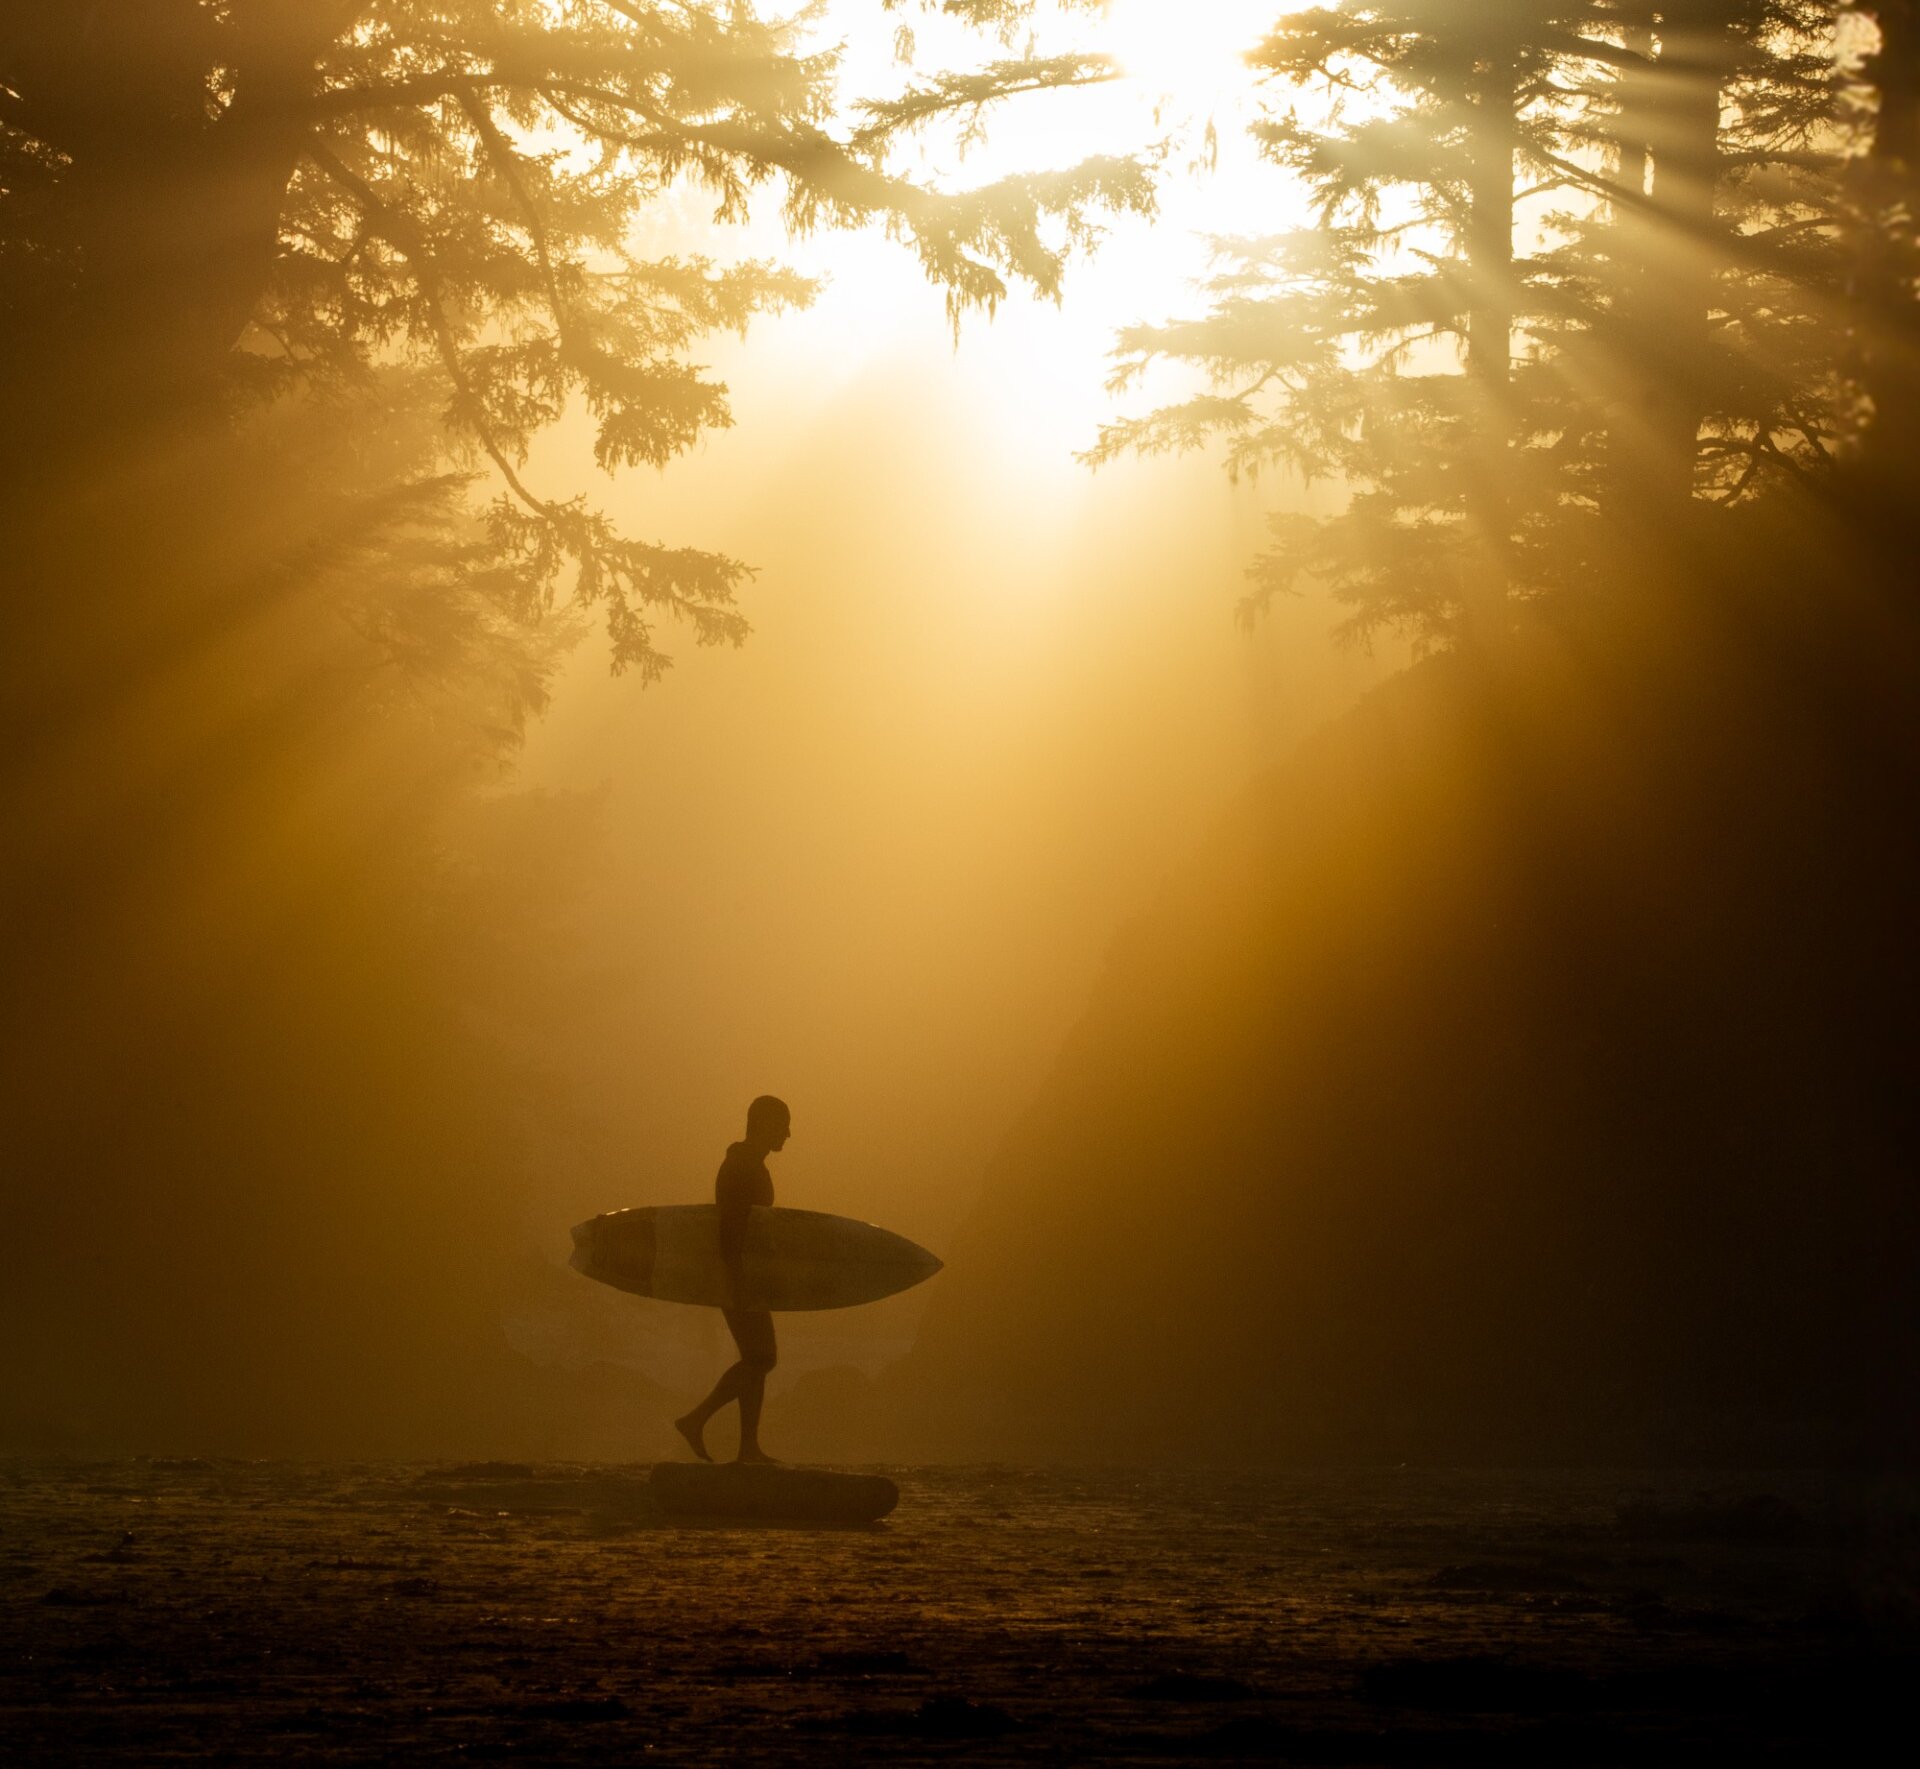 Surfer walking on a long on the beach with sunbeams peeking though the forest in the background